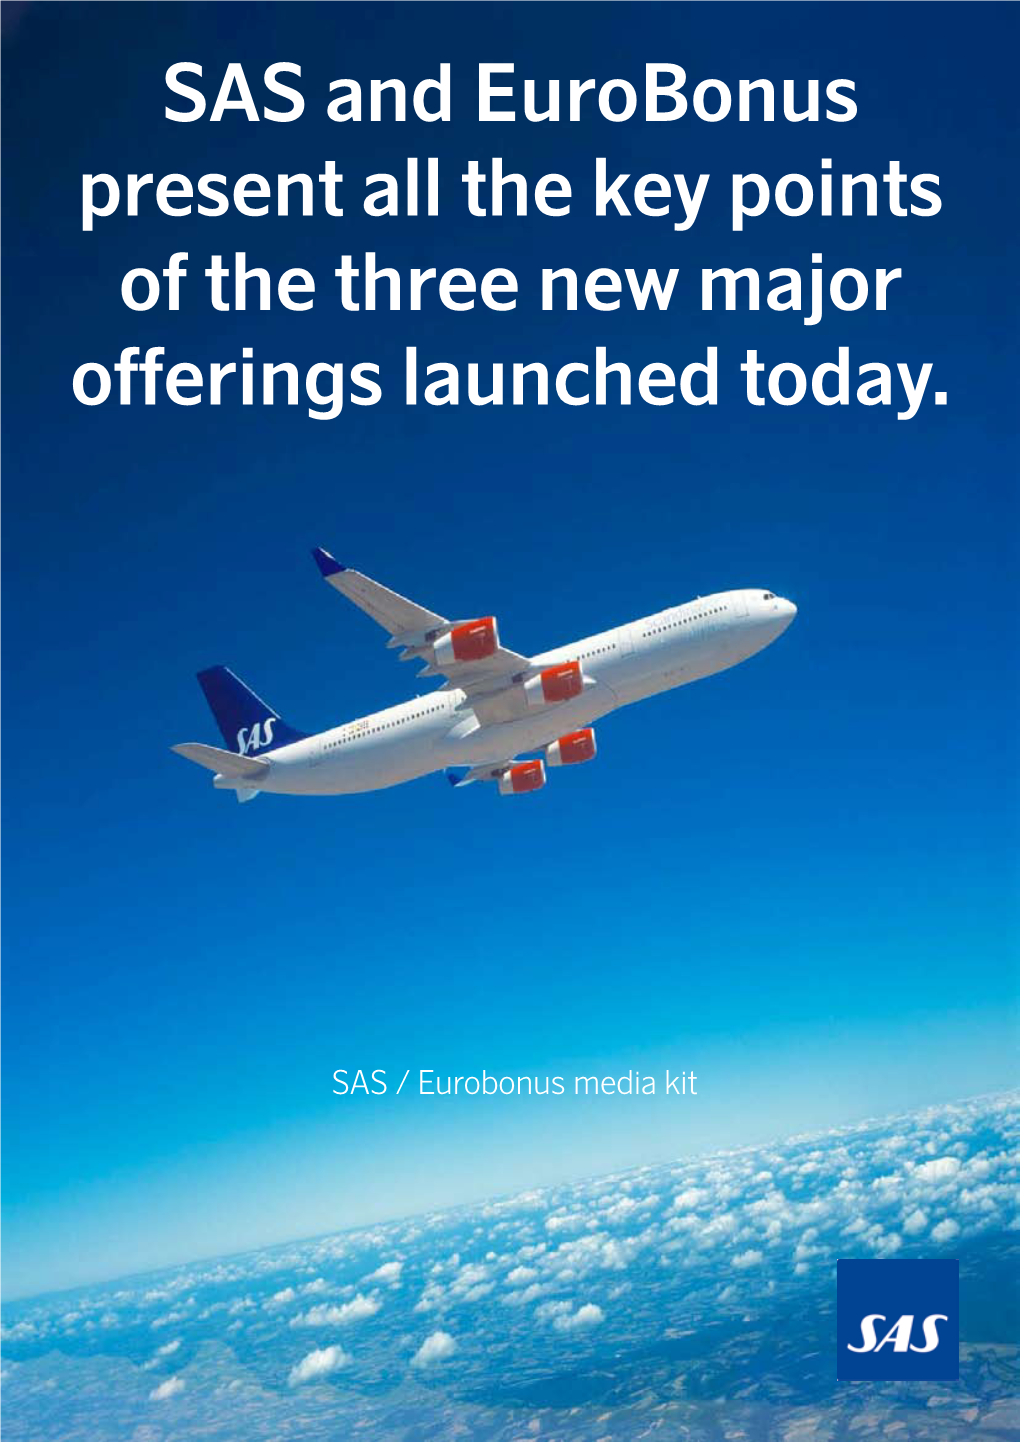 SAS and Eurobonus Present All the Key Points of the Three New Major Offerings Launched Today